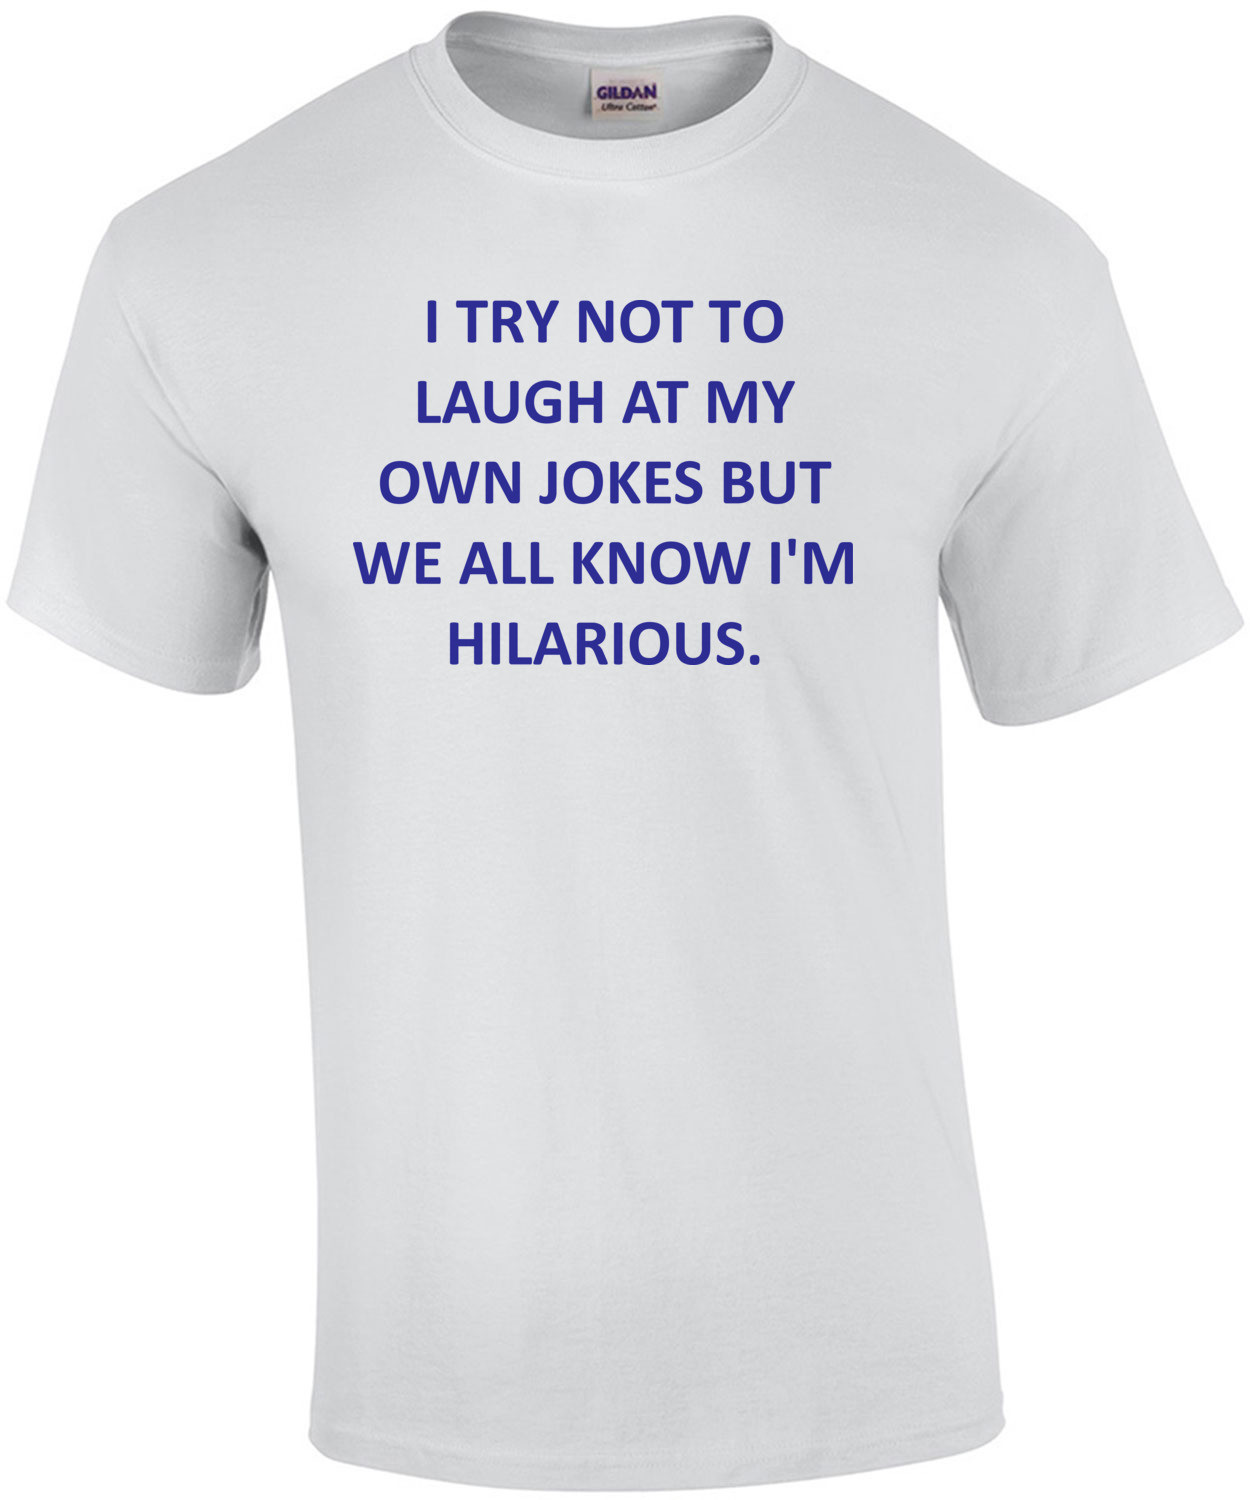 I TRY NOT TO LAUGH AT MY OWN JOKES BUT WE ALL KNOW I'M HILARIOUS. T-SHIRT